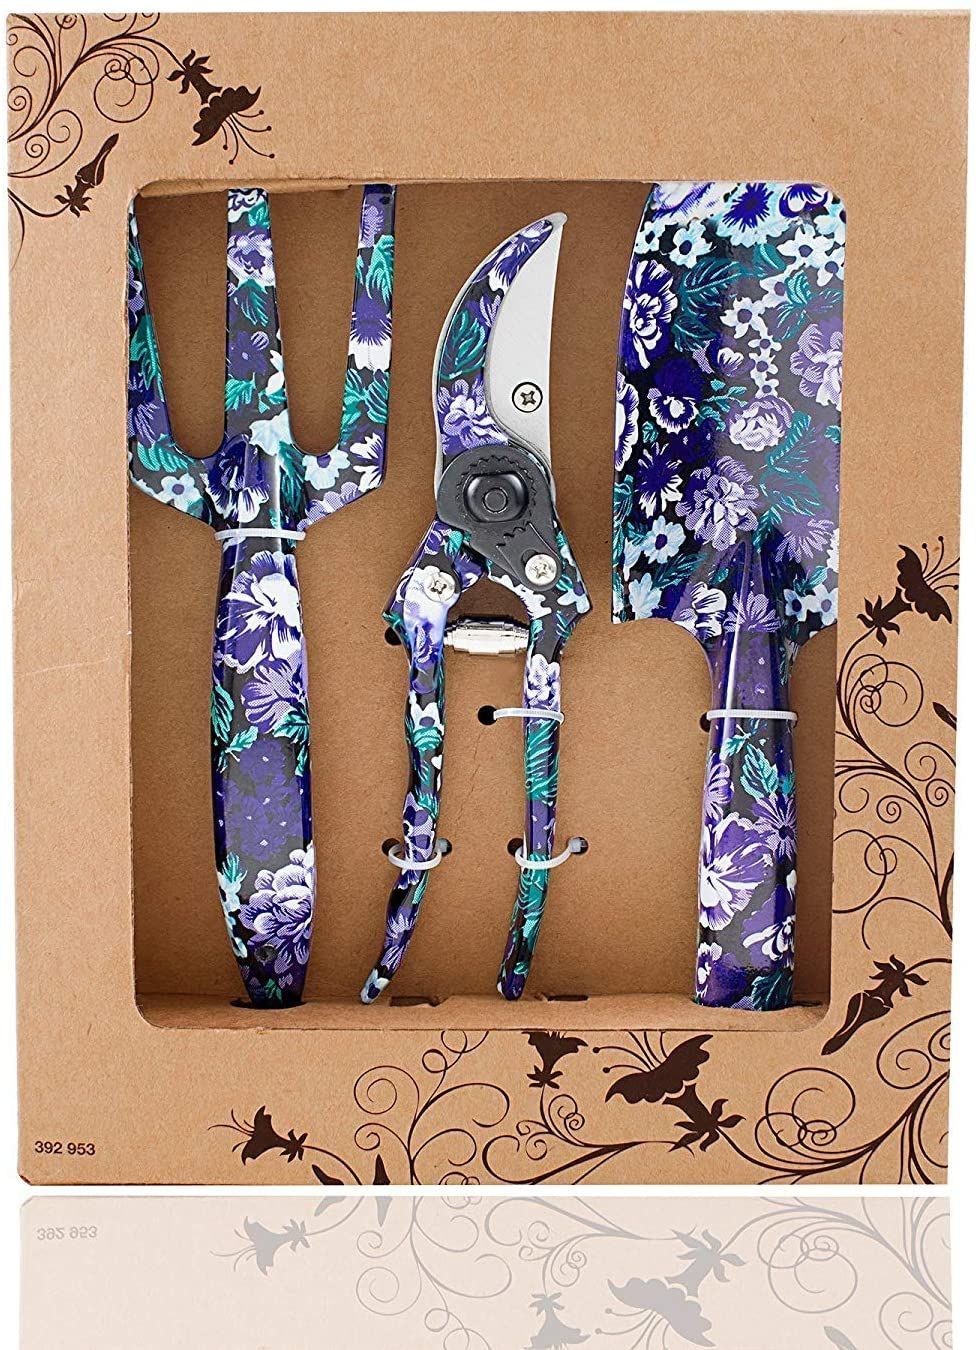 Garden Party Navy Blue Floral Two Piece Garden Tool Set Hand Tools New In Box 